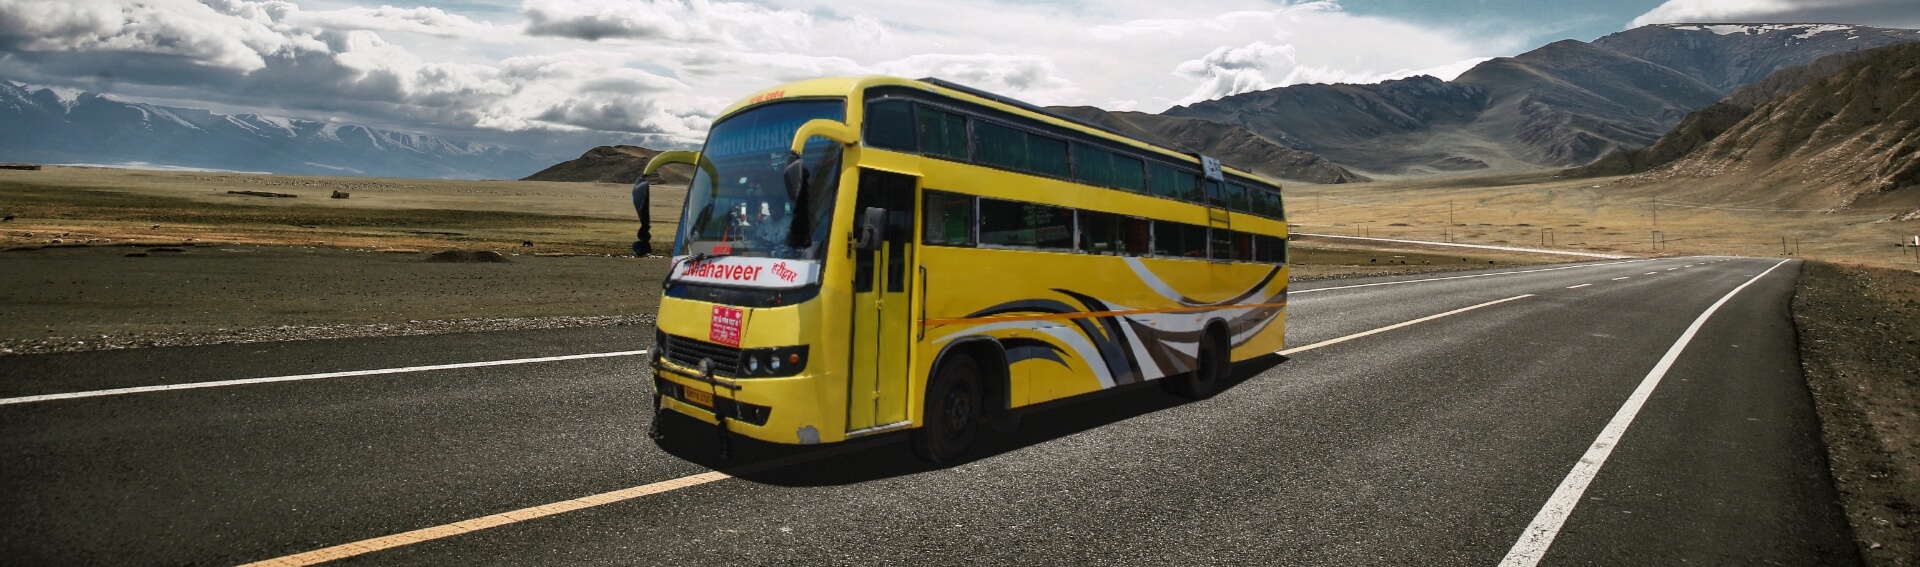 Online Bus Ticket Booking Choudhary King Travels